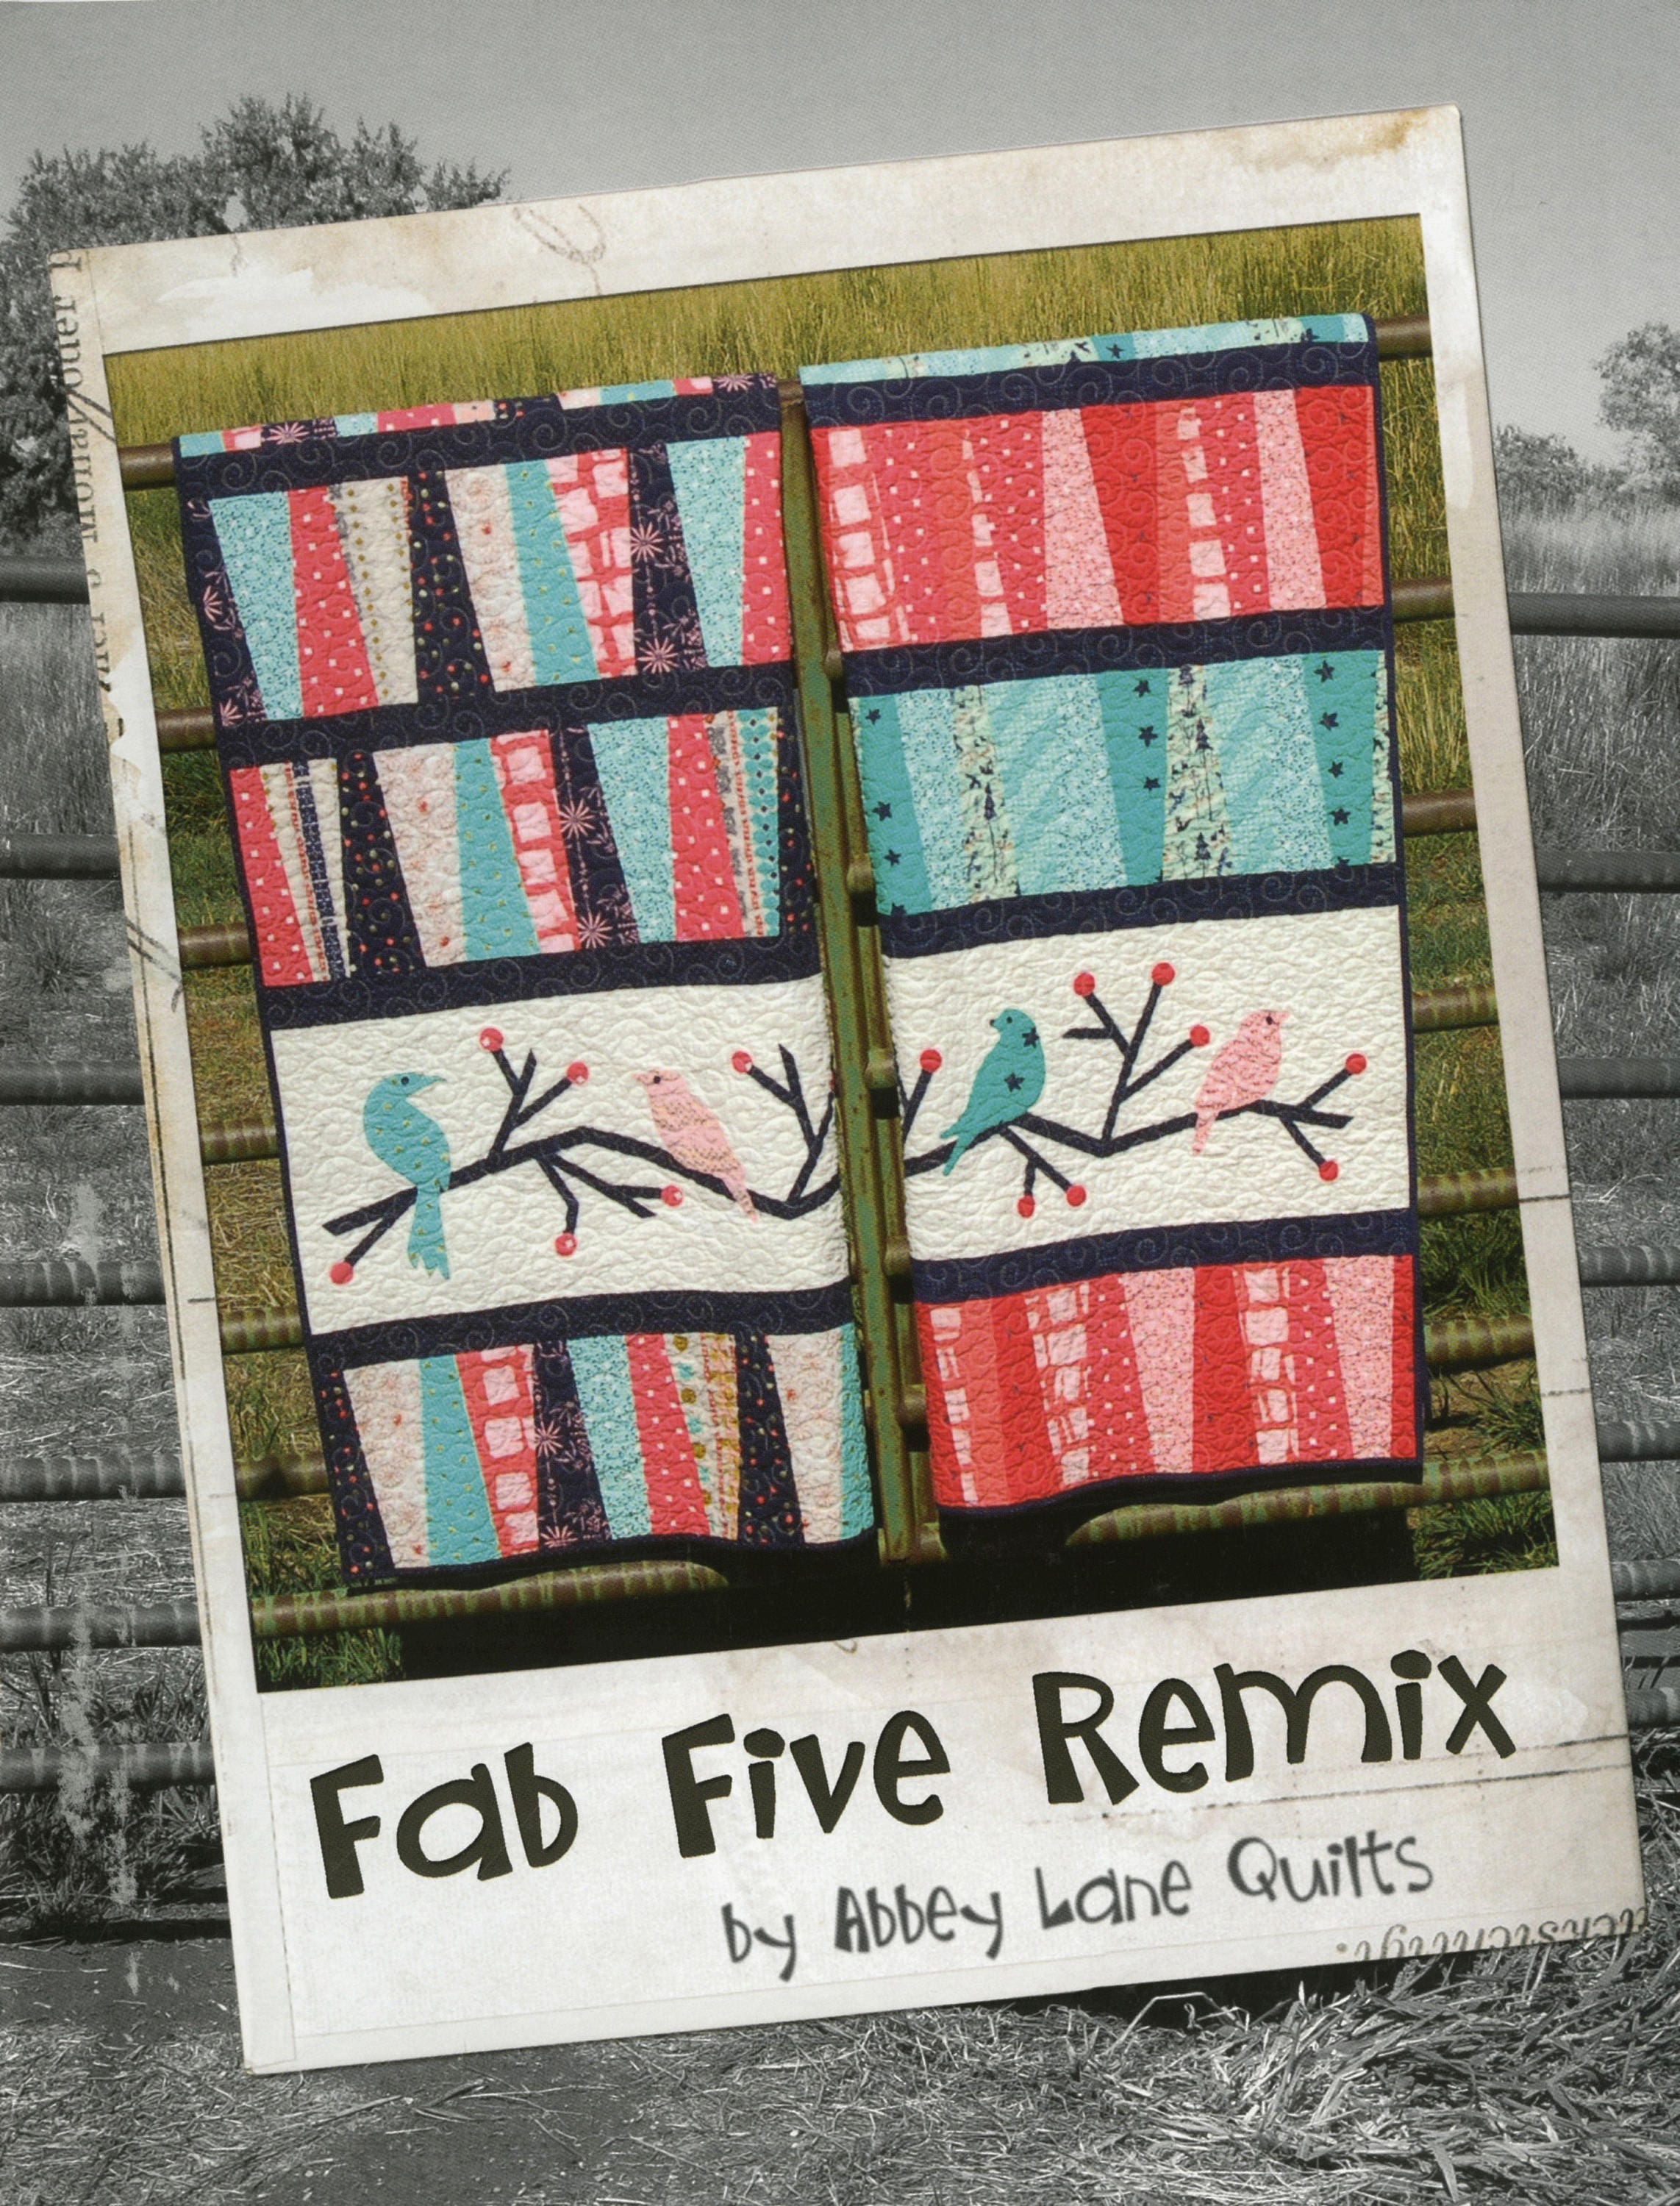 Fab Five Remix book by Marcea Owen and Janice Liljenquist for Abbey Lane Quilts